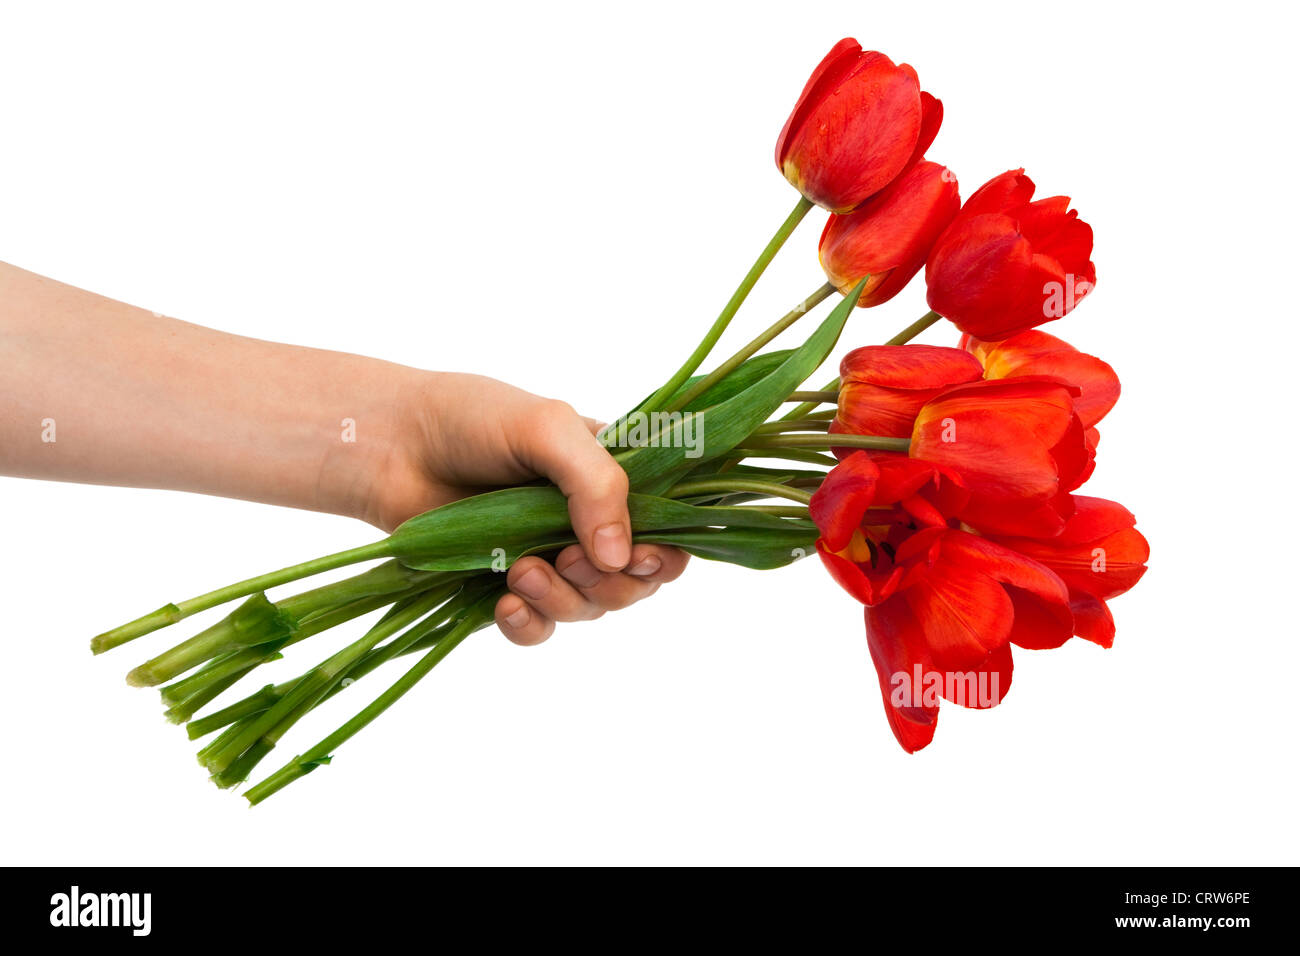 tulips in a hand Stock Photo